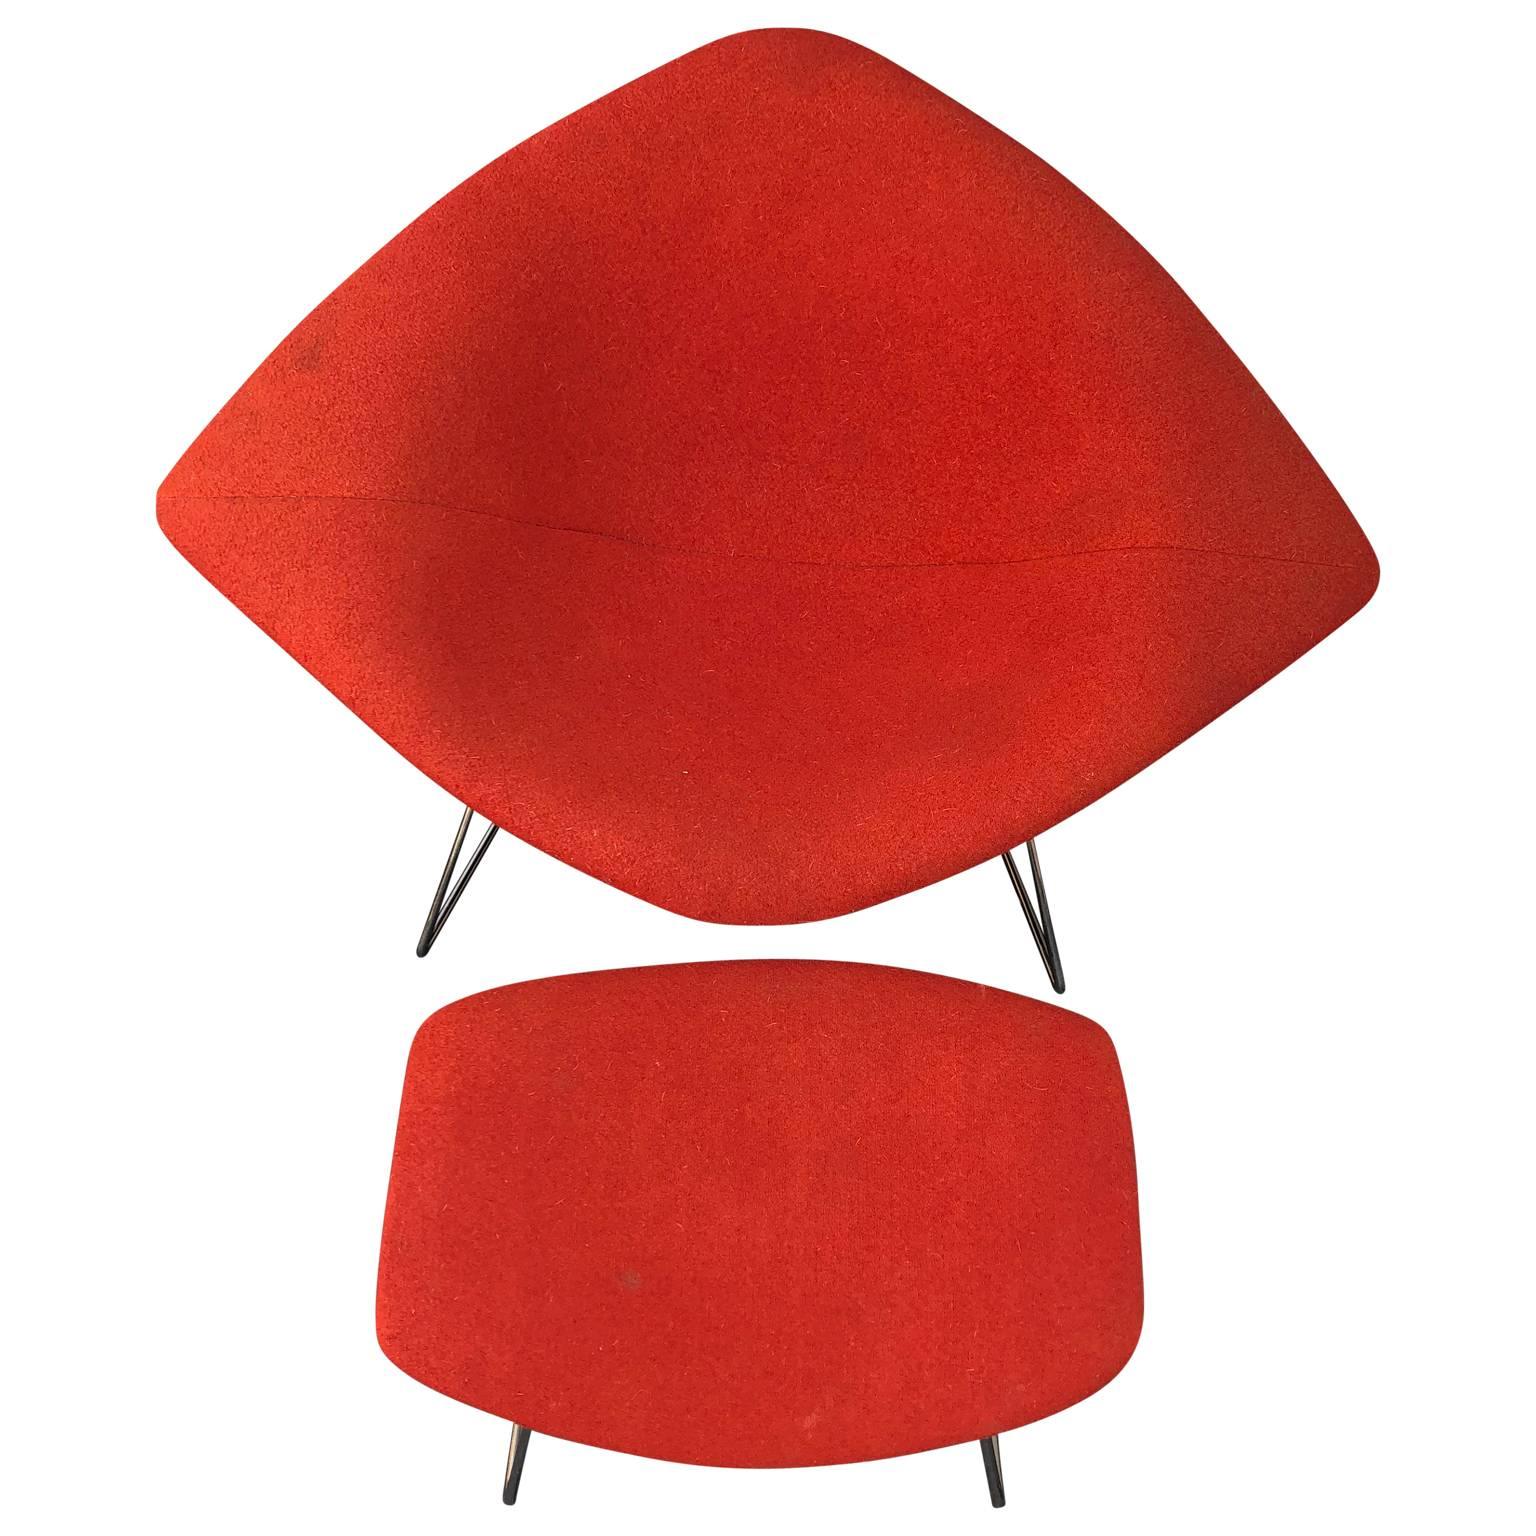 Large diamond chrome chair designed by Harry Bertoia for Knoll in 1952. 
The chair  and ottoman have the original red fabric cover. Harry Bertoia’s wire chairs are among the most recognized achievements of Mid-Century Modern design and a proud part